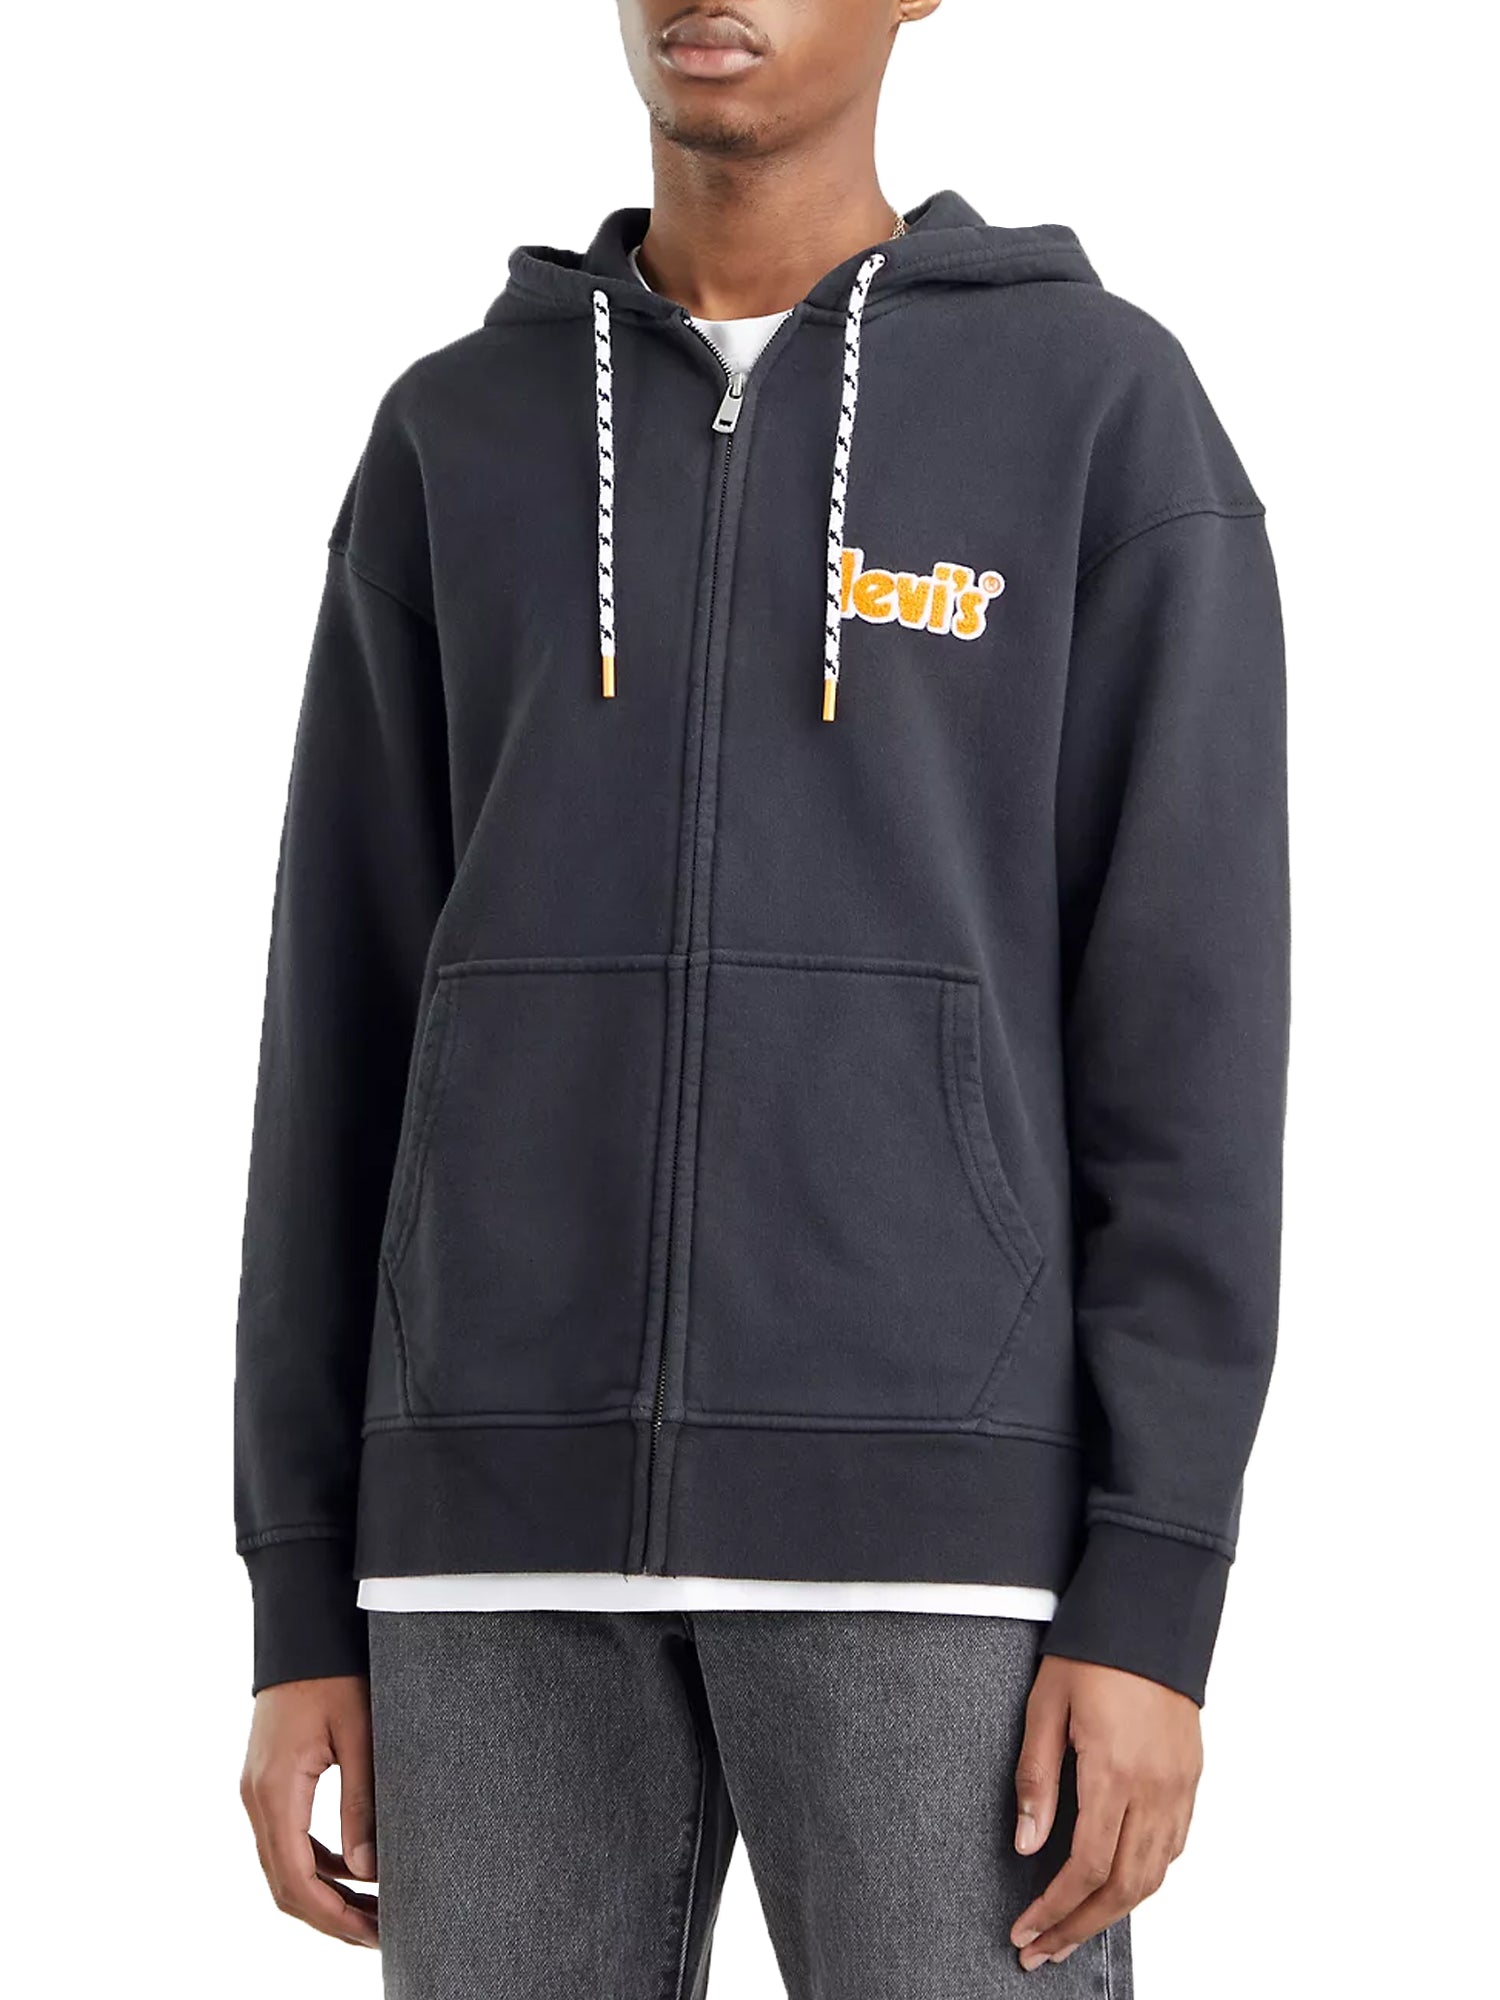 RELAXED GRAPHIC ZIP UP HODDIE